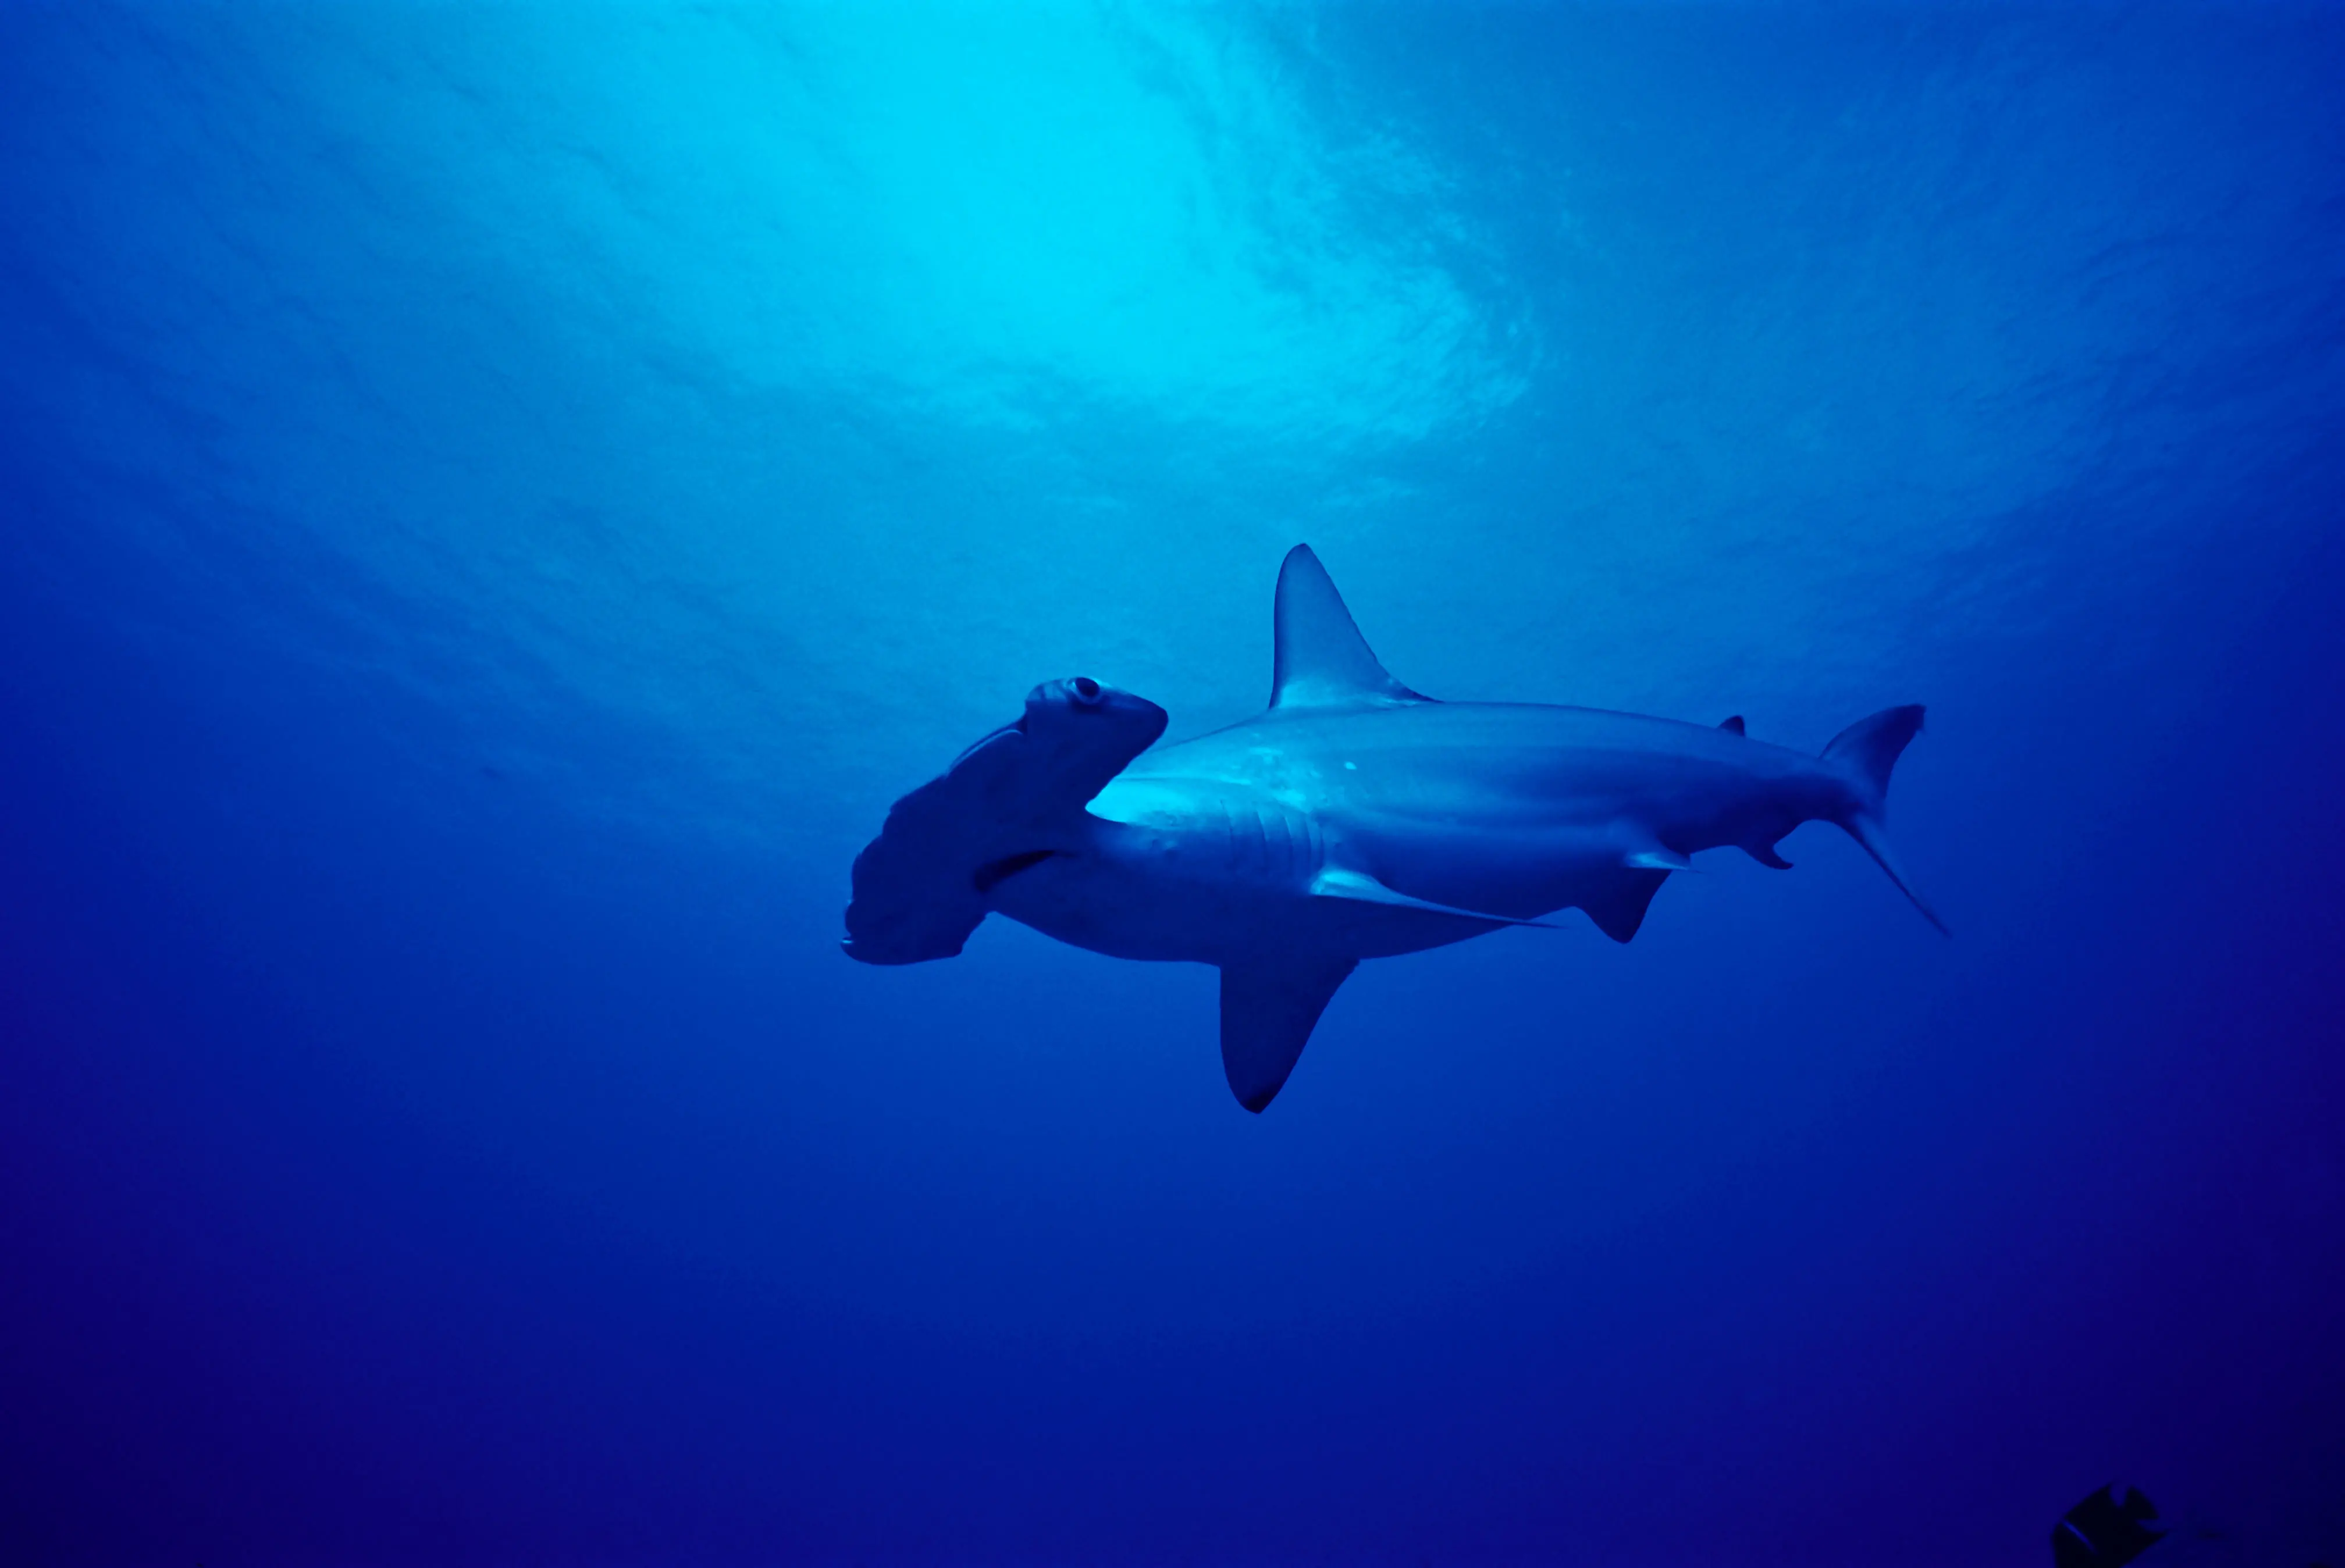 Hammerhead sharks migrate to warmer waters in winter to breed and to cooler waters in summer, often tracking migratory fish.